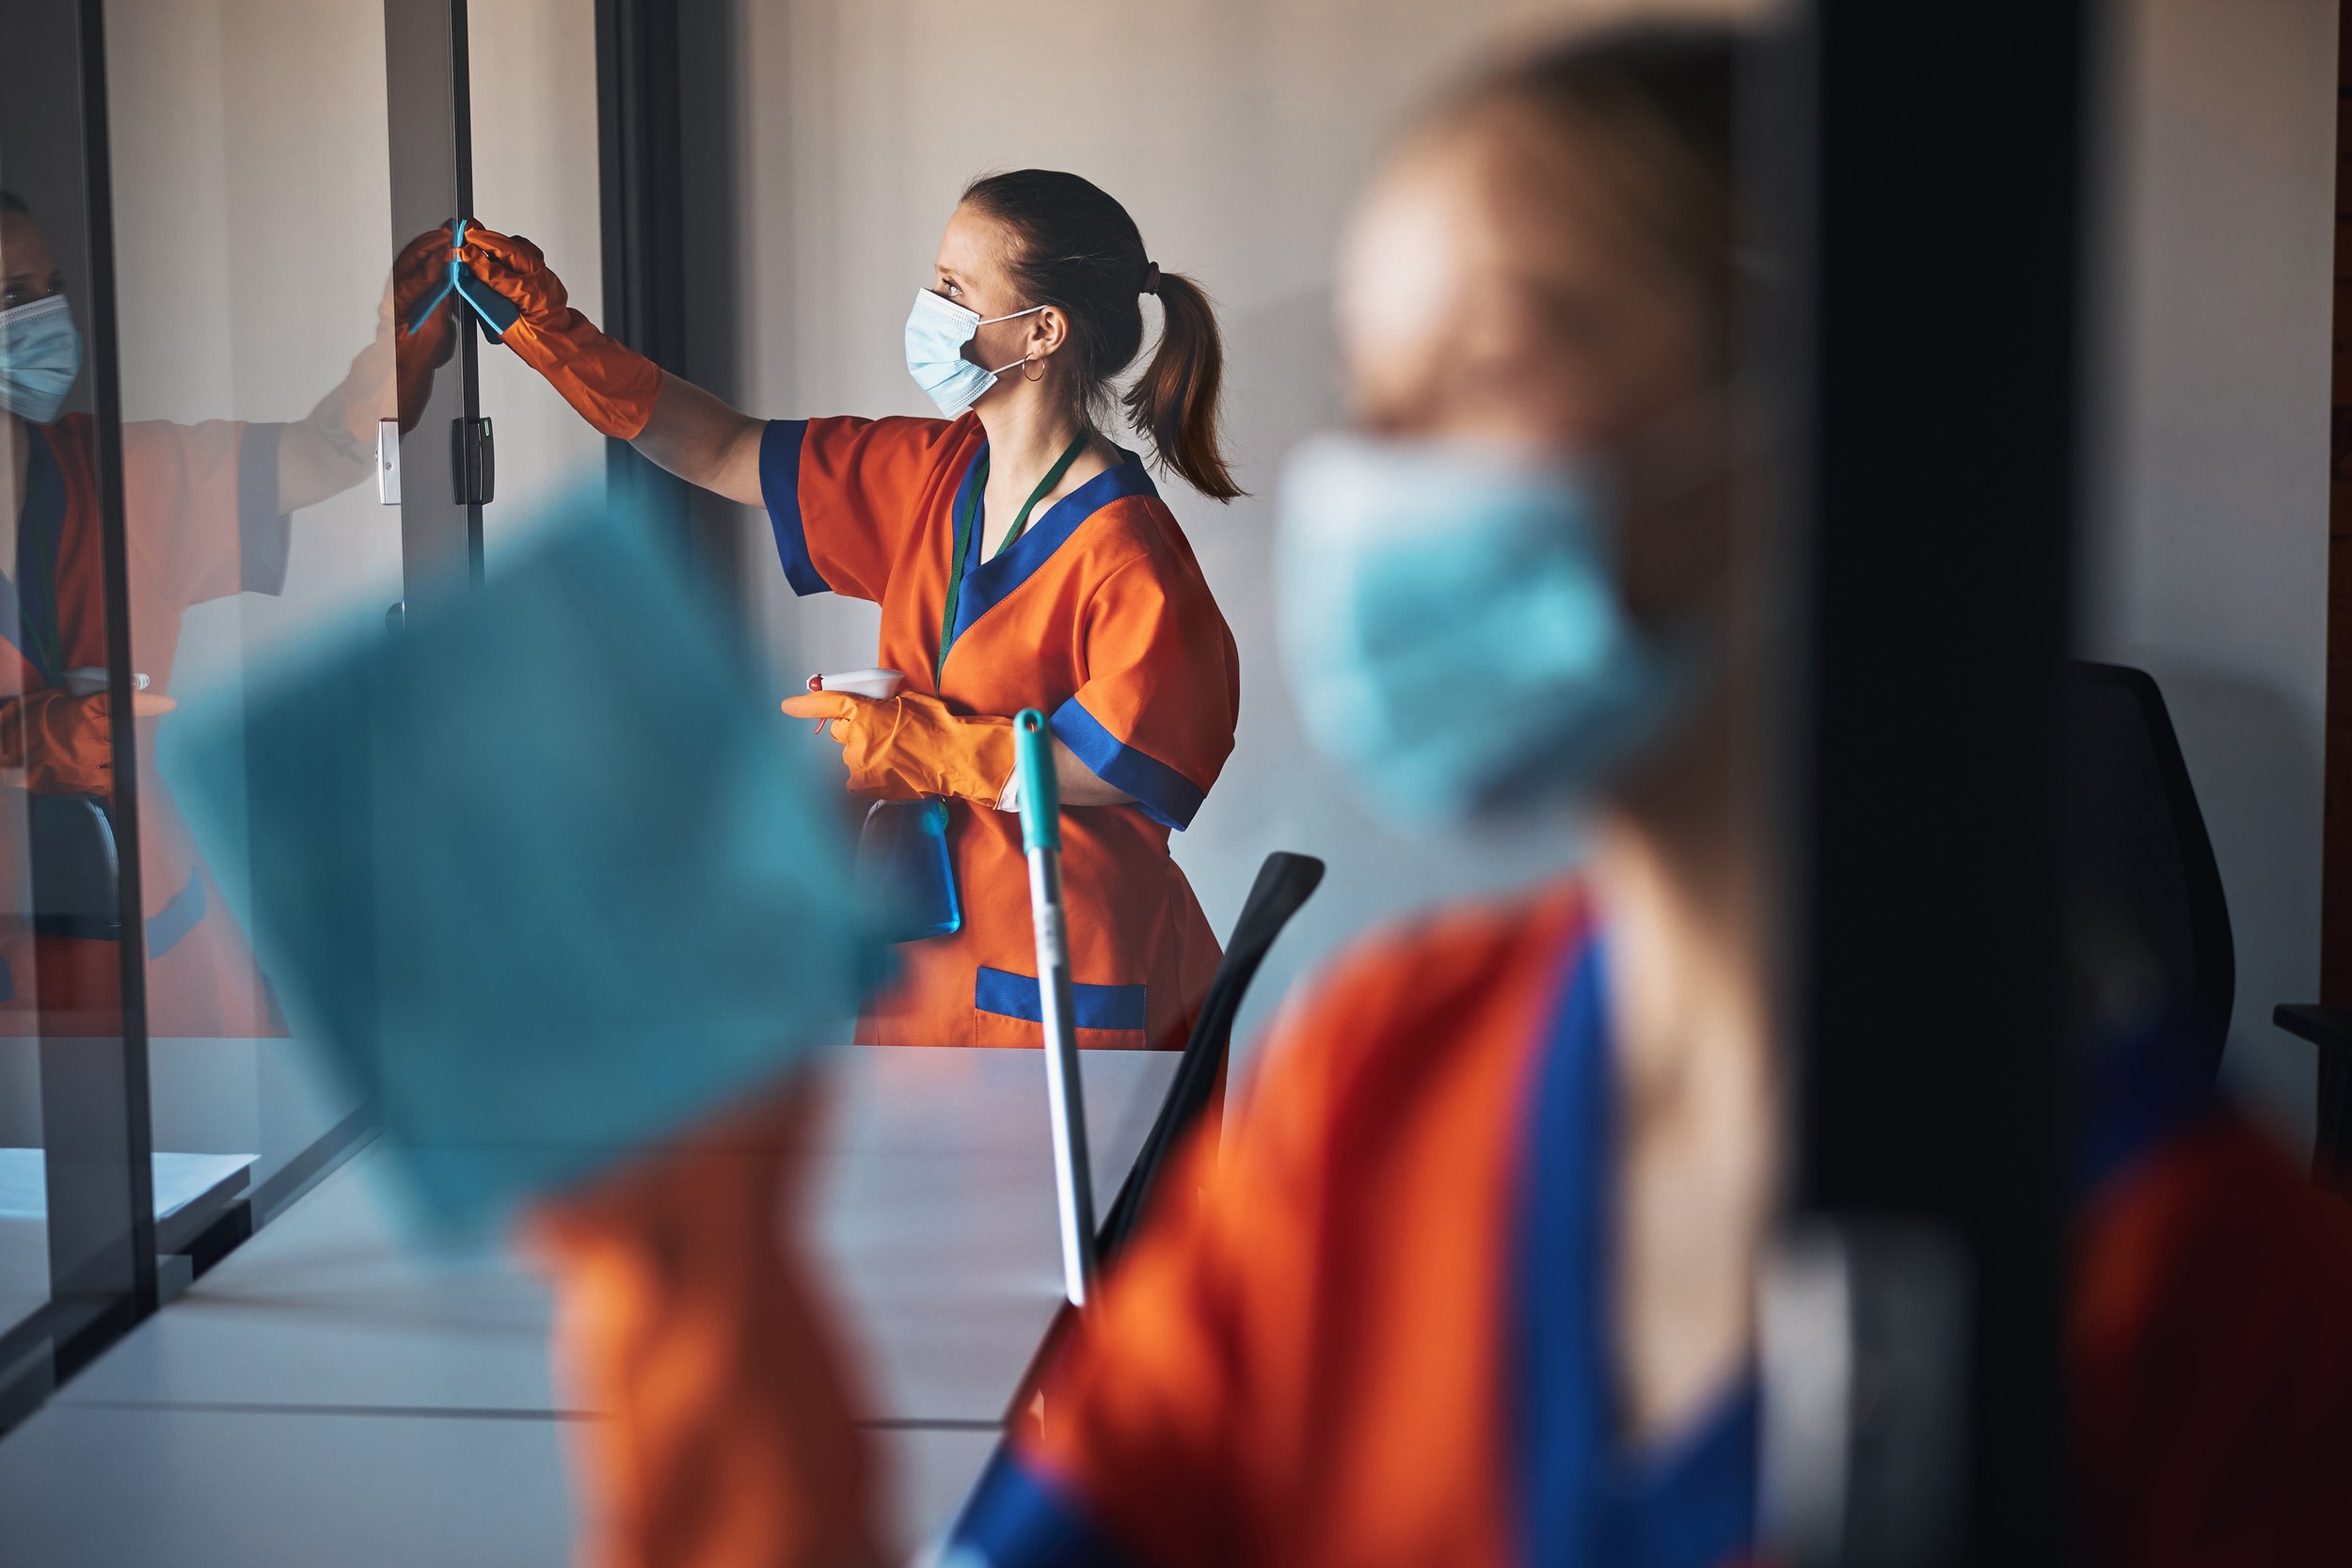 A woman in an orange and blue uniform cleaning.